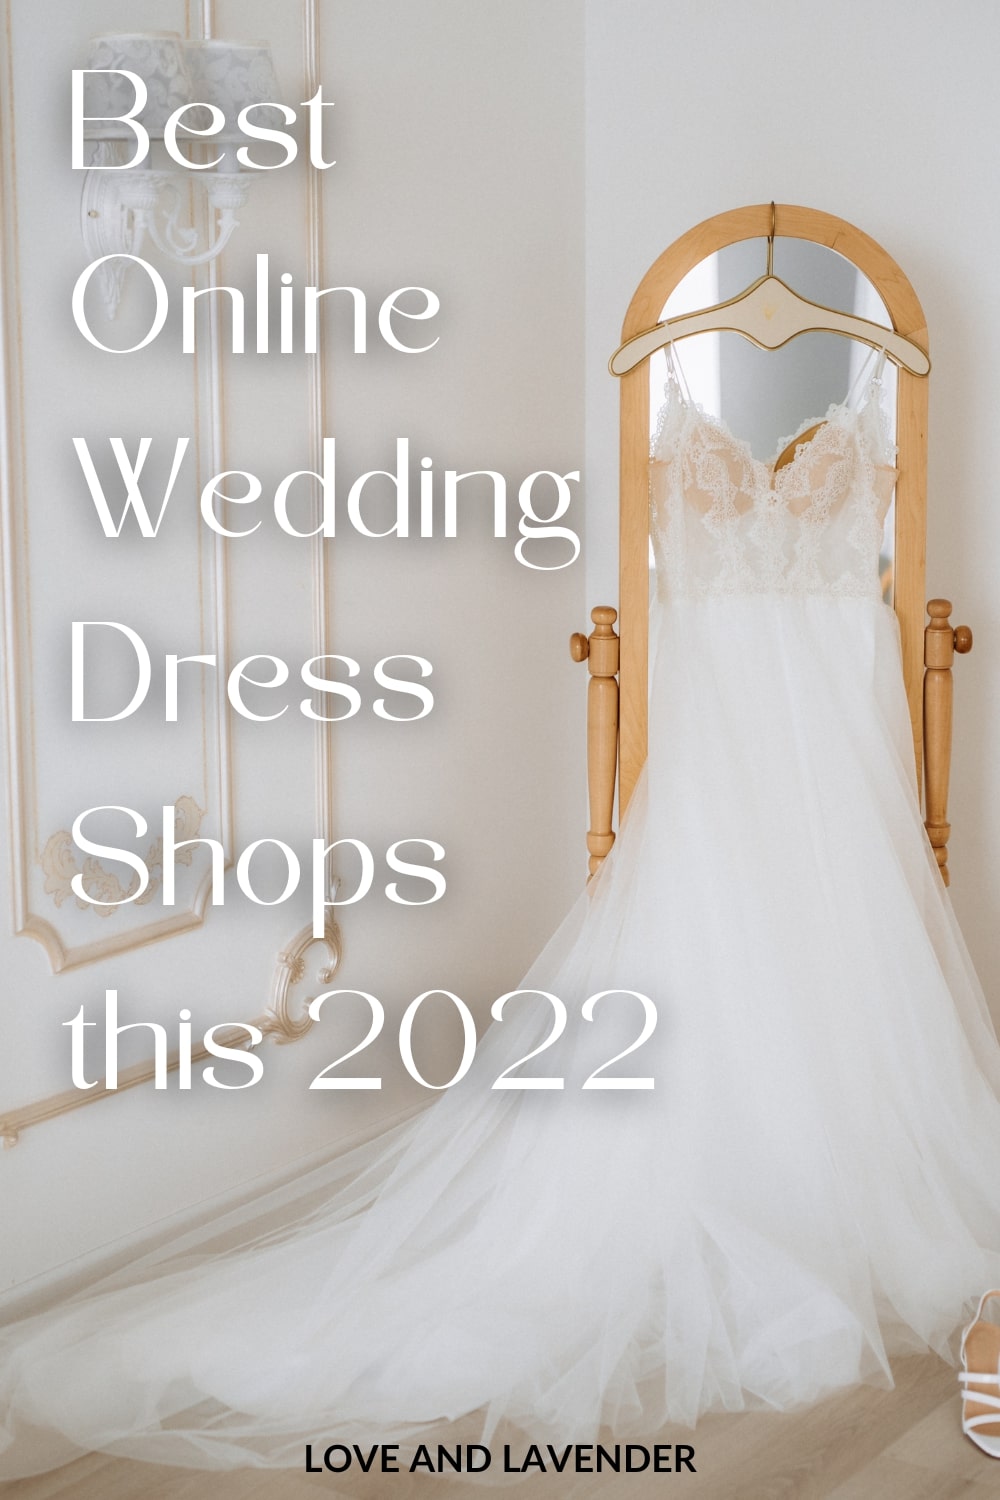 Who said you had to spend a fortune on a wedding dress? Affordable doesn’t mean cheap or tacky. It means you get a quality bridal gown at a price point that fits your budget. ﻿We’ve got a list of the best places to find beautiful, quality gowns without breaking the bank. Check out the blog today!